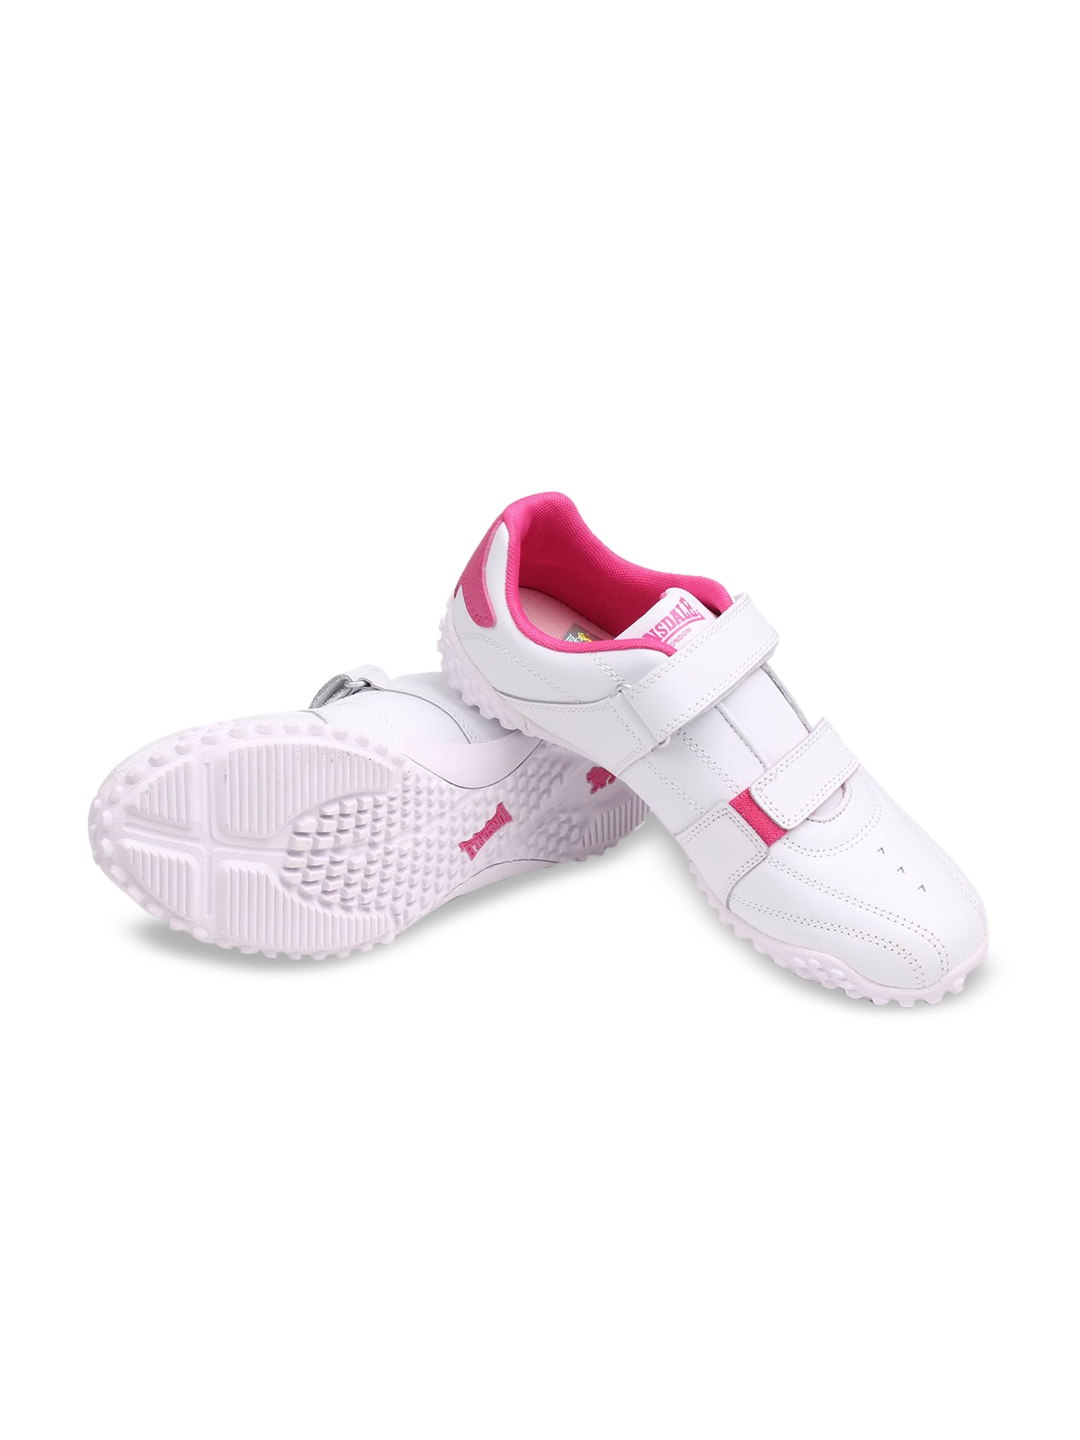 Buy Lonsdale Women White Leather Training Or Gym Shoes - Sports Shoes ...